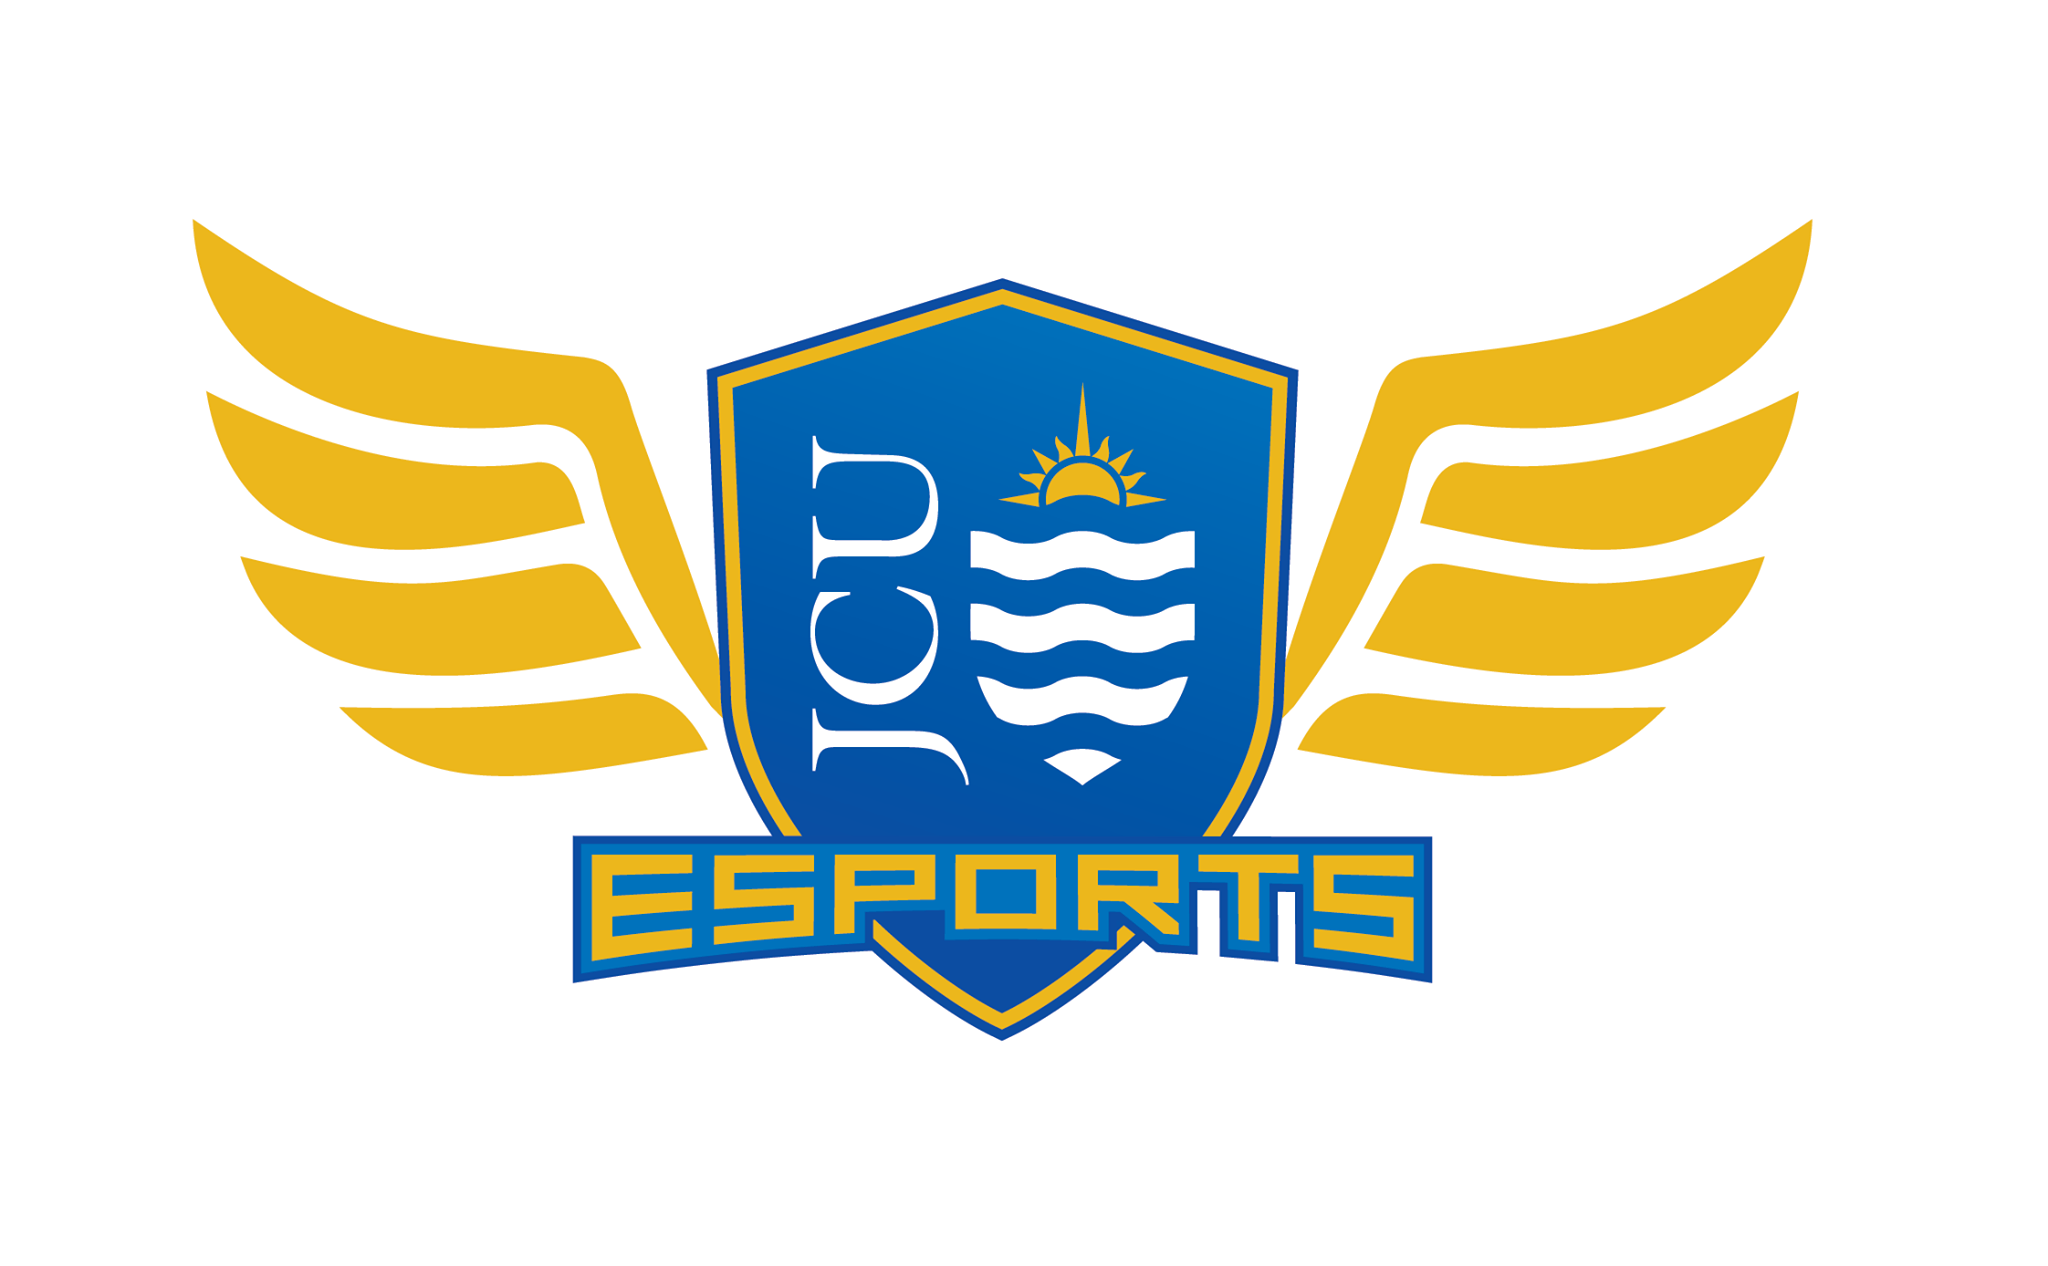 The eSports logo featuring a blue and gold shield with wings